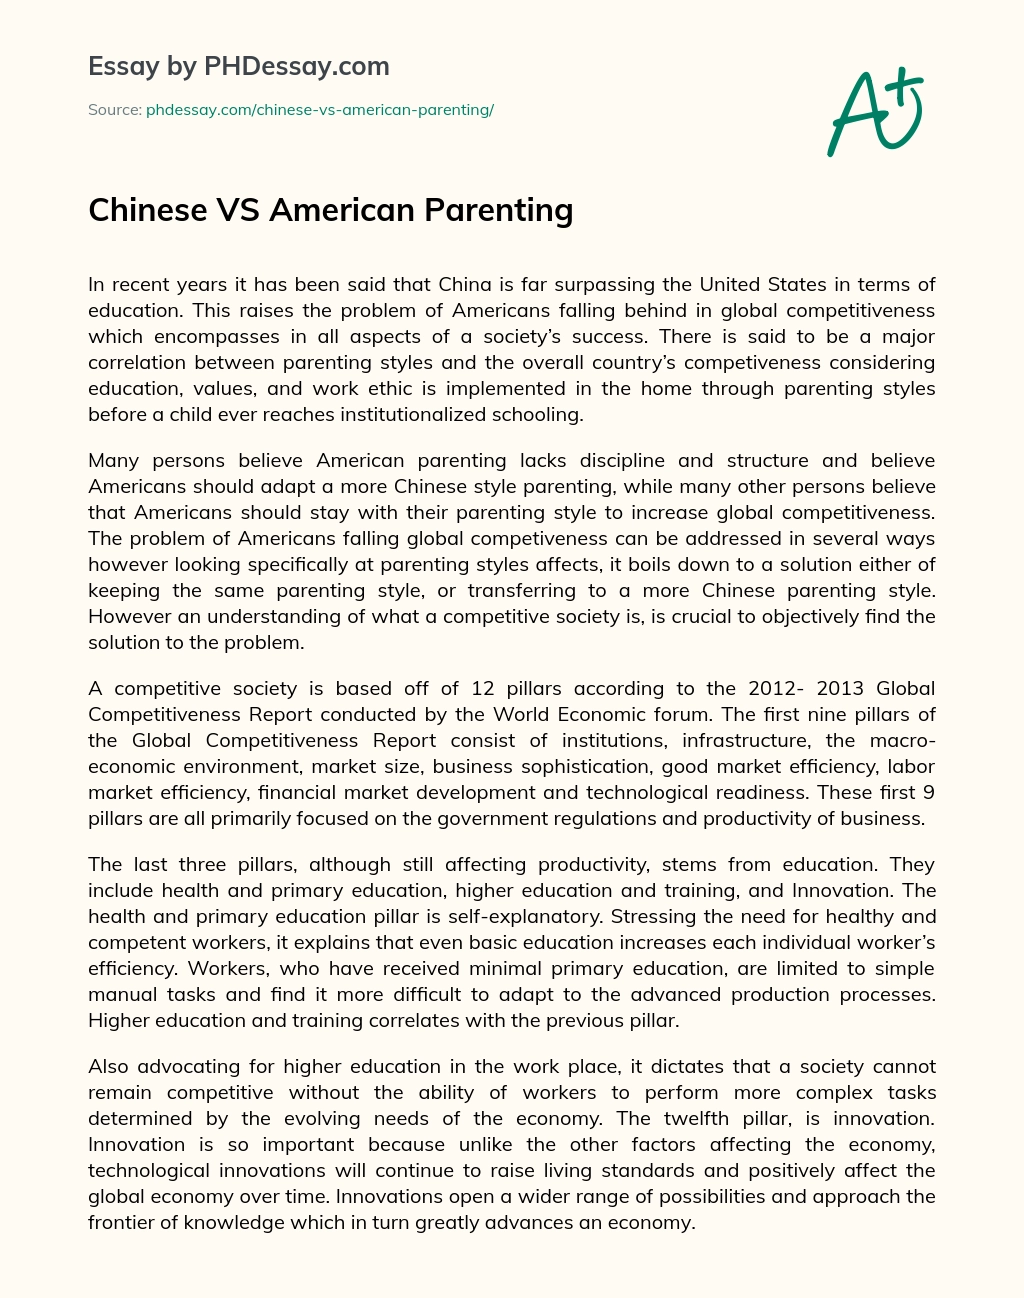 Chinese VS American Parenting essay